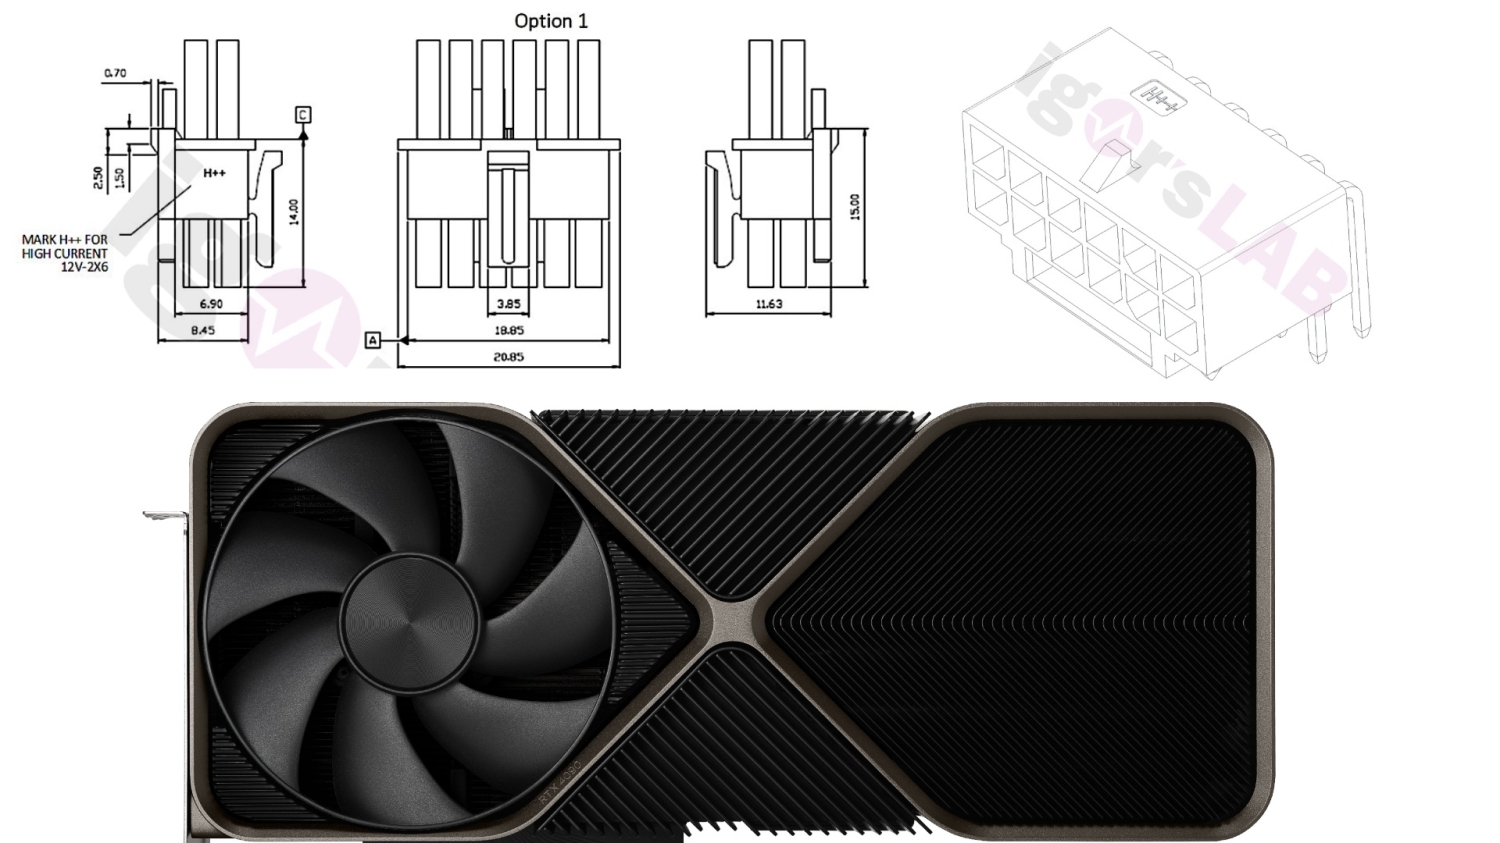 New GPU power connector design eliminates cables, delivers 900 watts